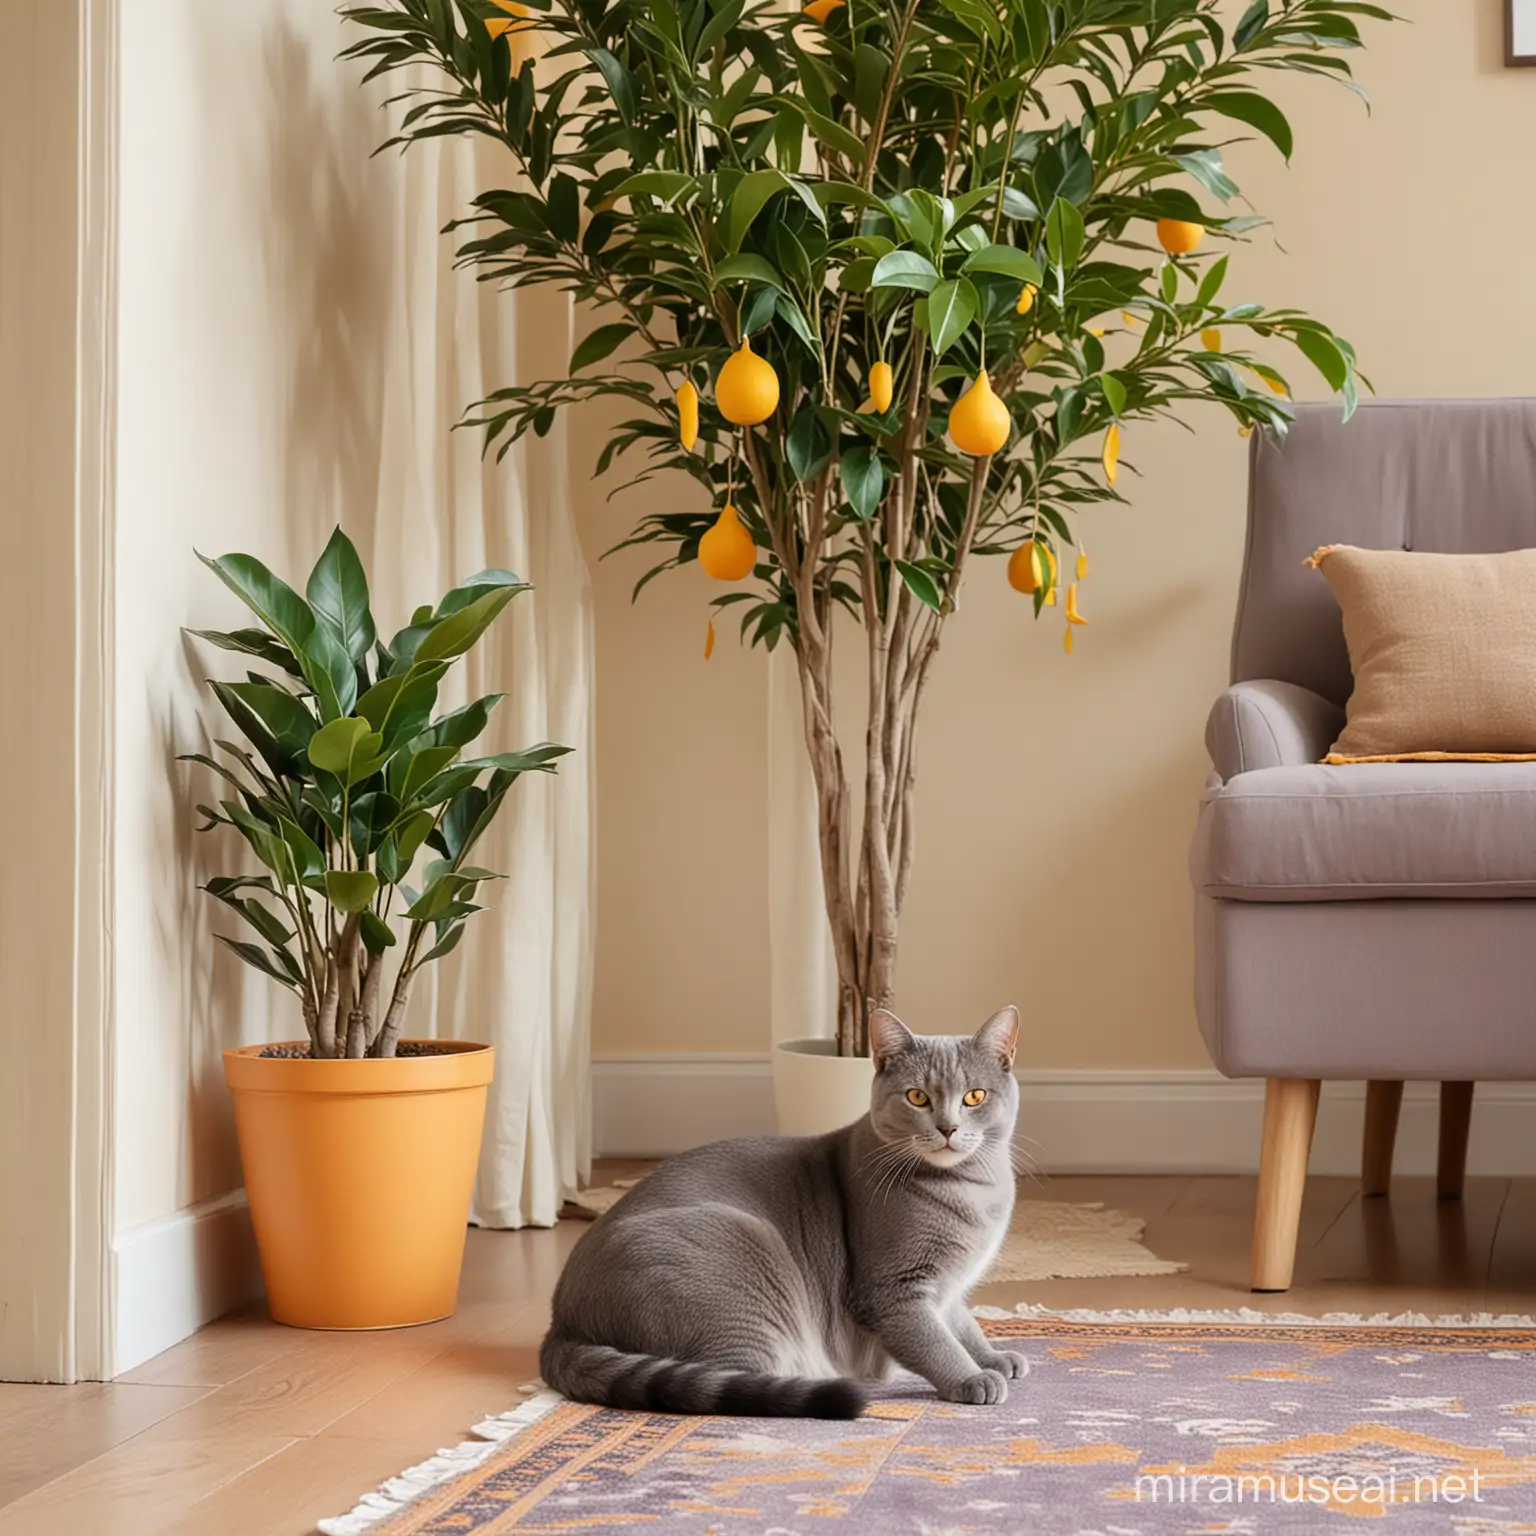 Gray cat sits on the floor next to a ficus tree in the living room in lilac, yellow and orange tones